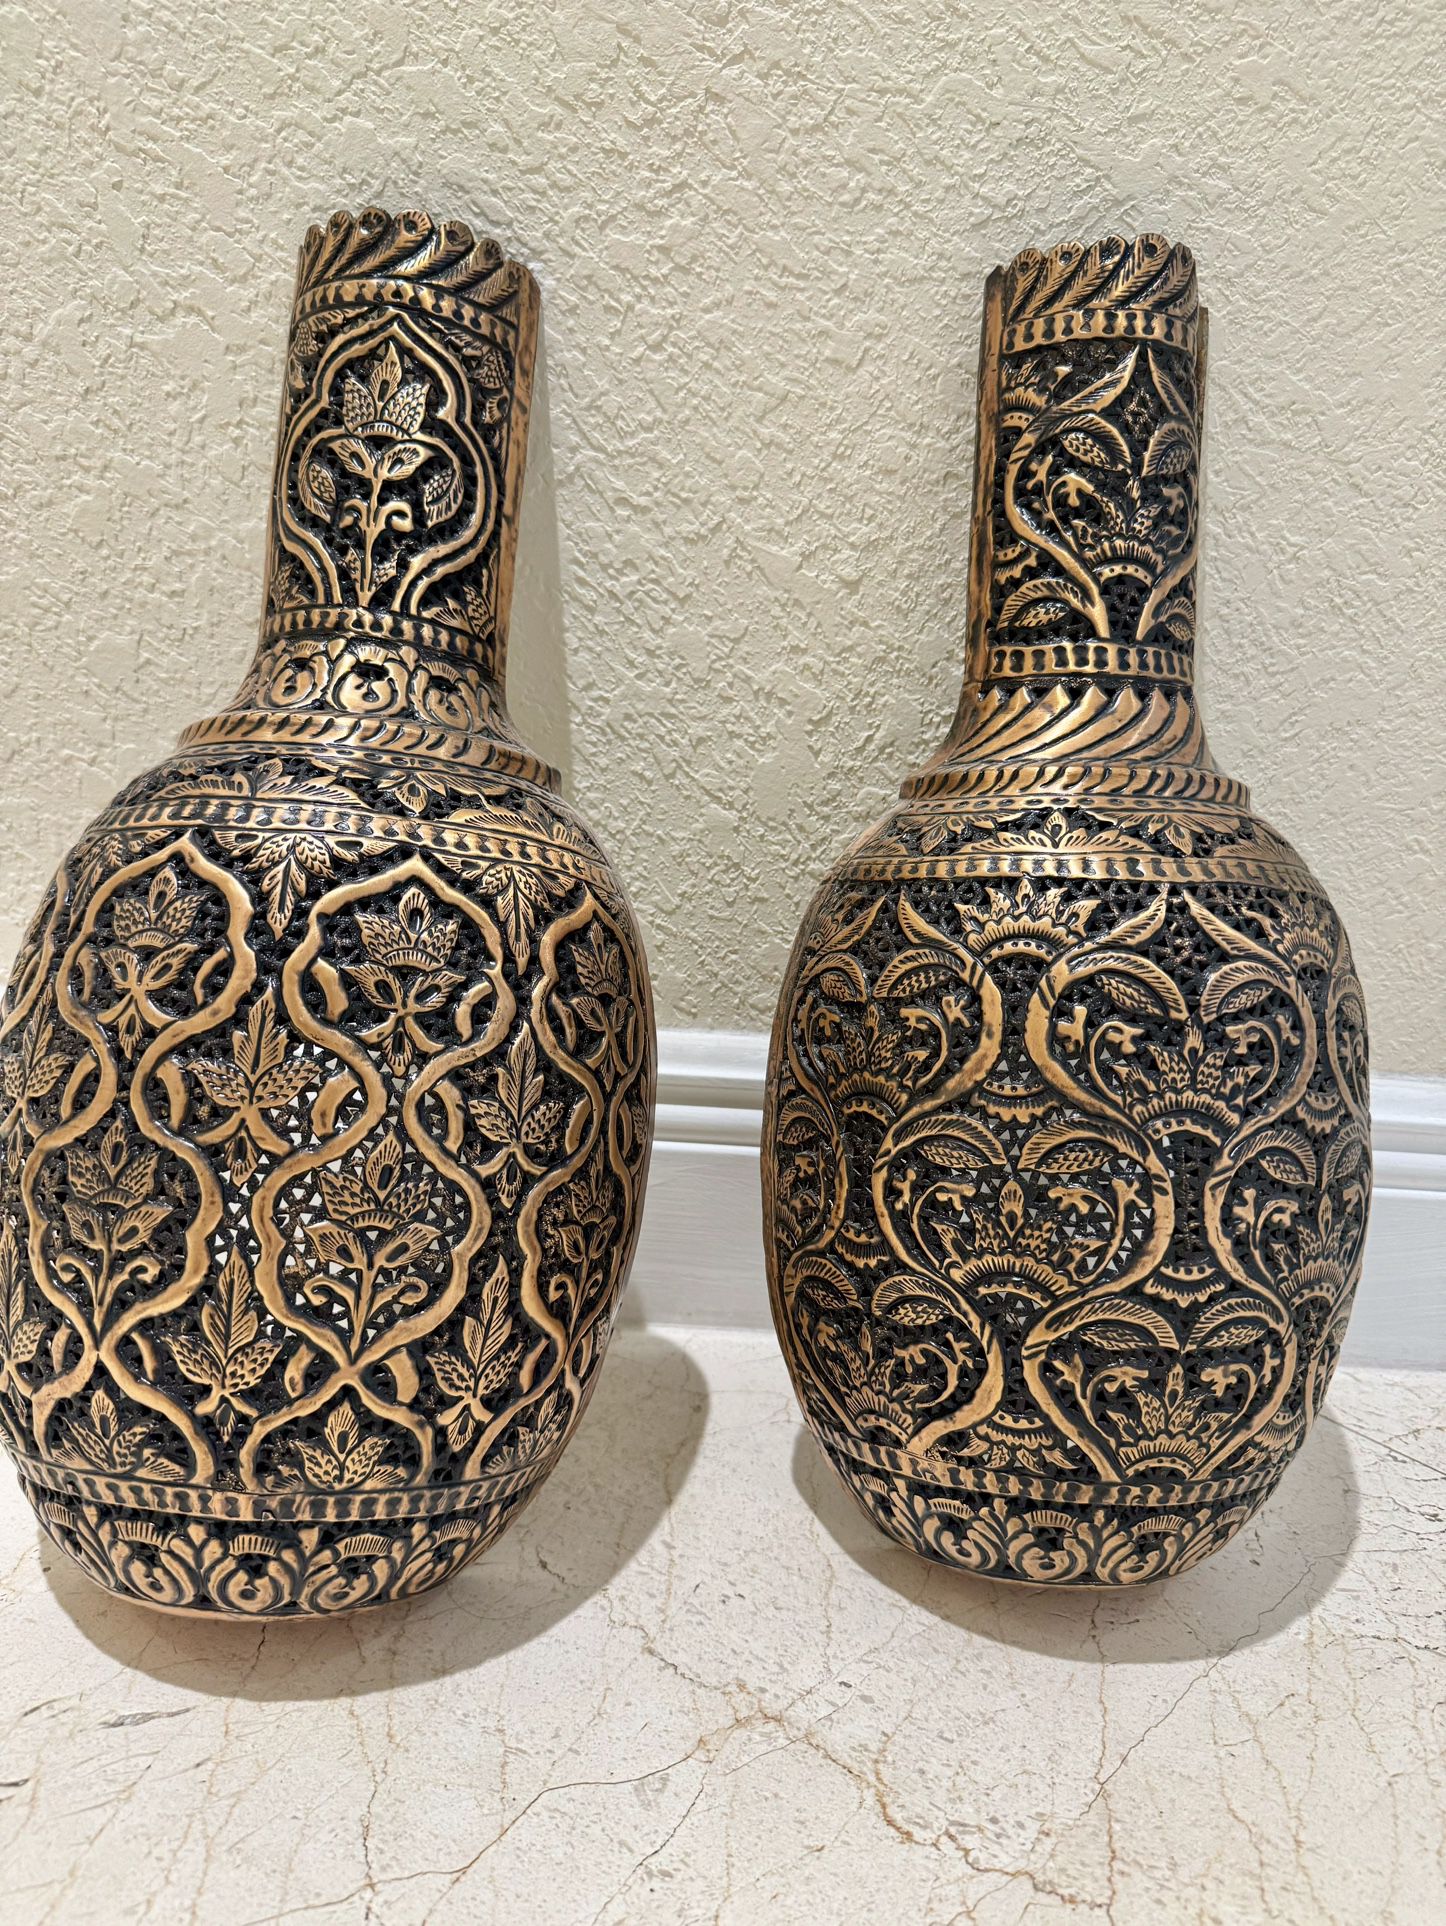 Beautiful Copper Wall Decor In A Great Condition Comes In A Set For $50